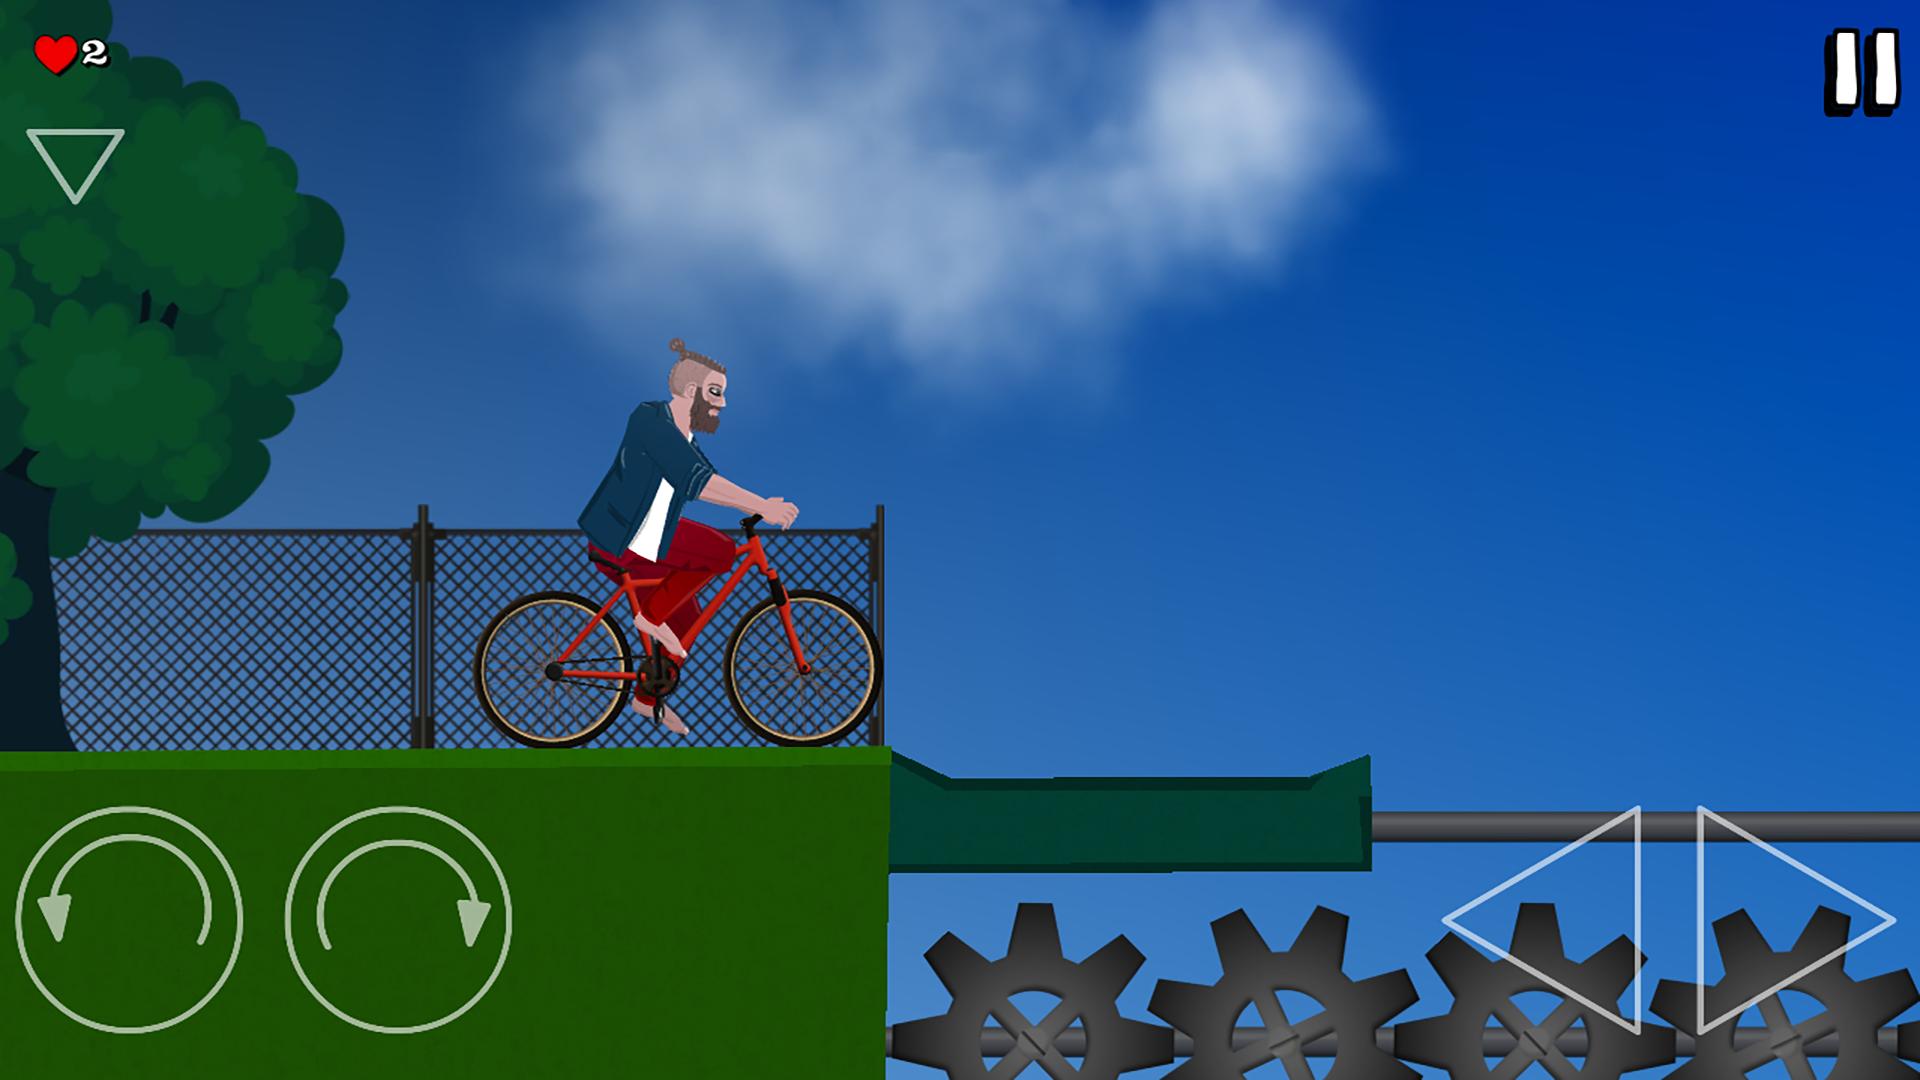 Short Ride for Android - APK Download